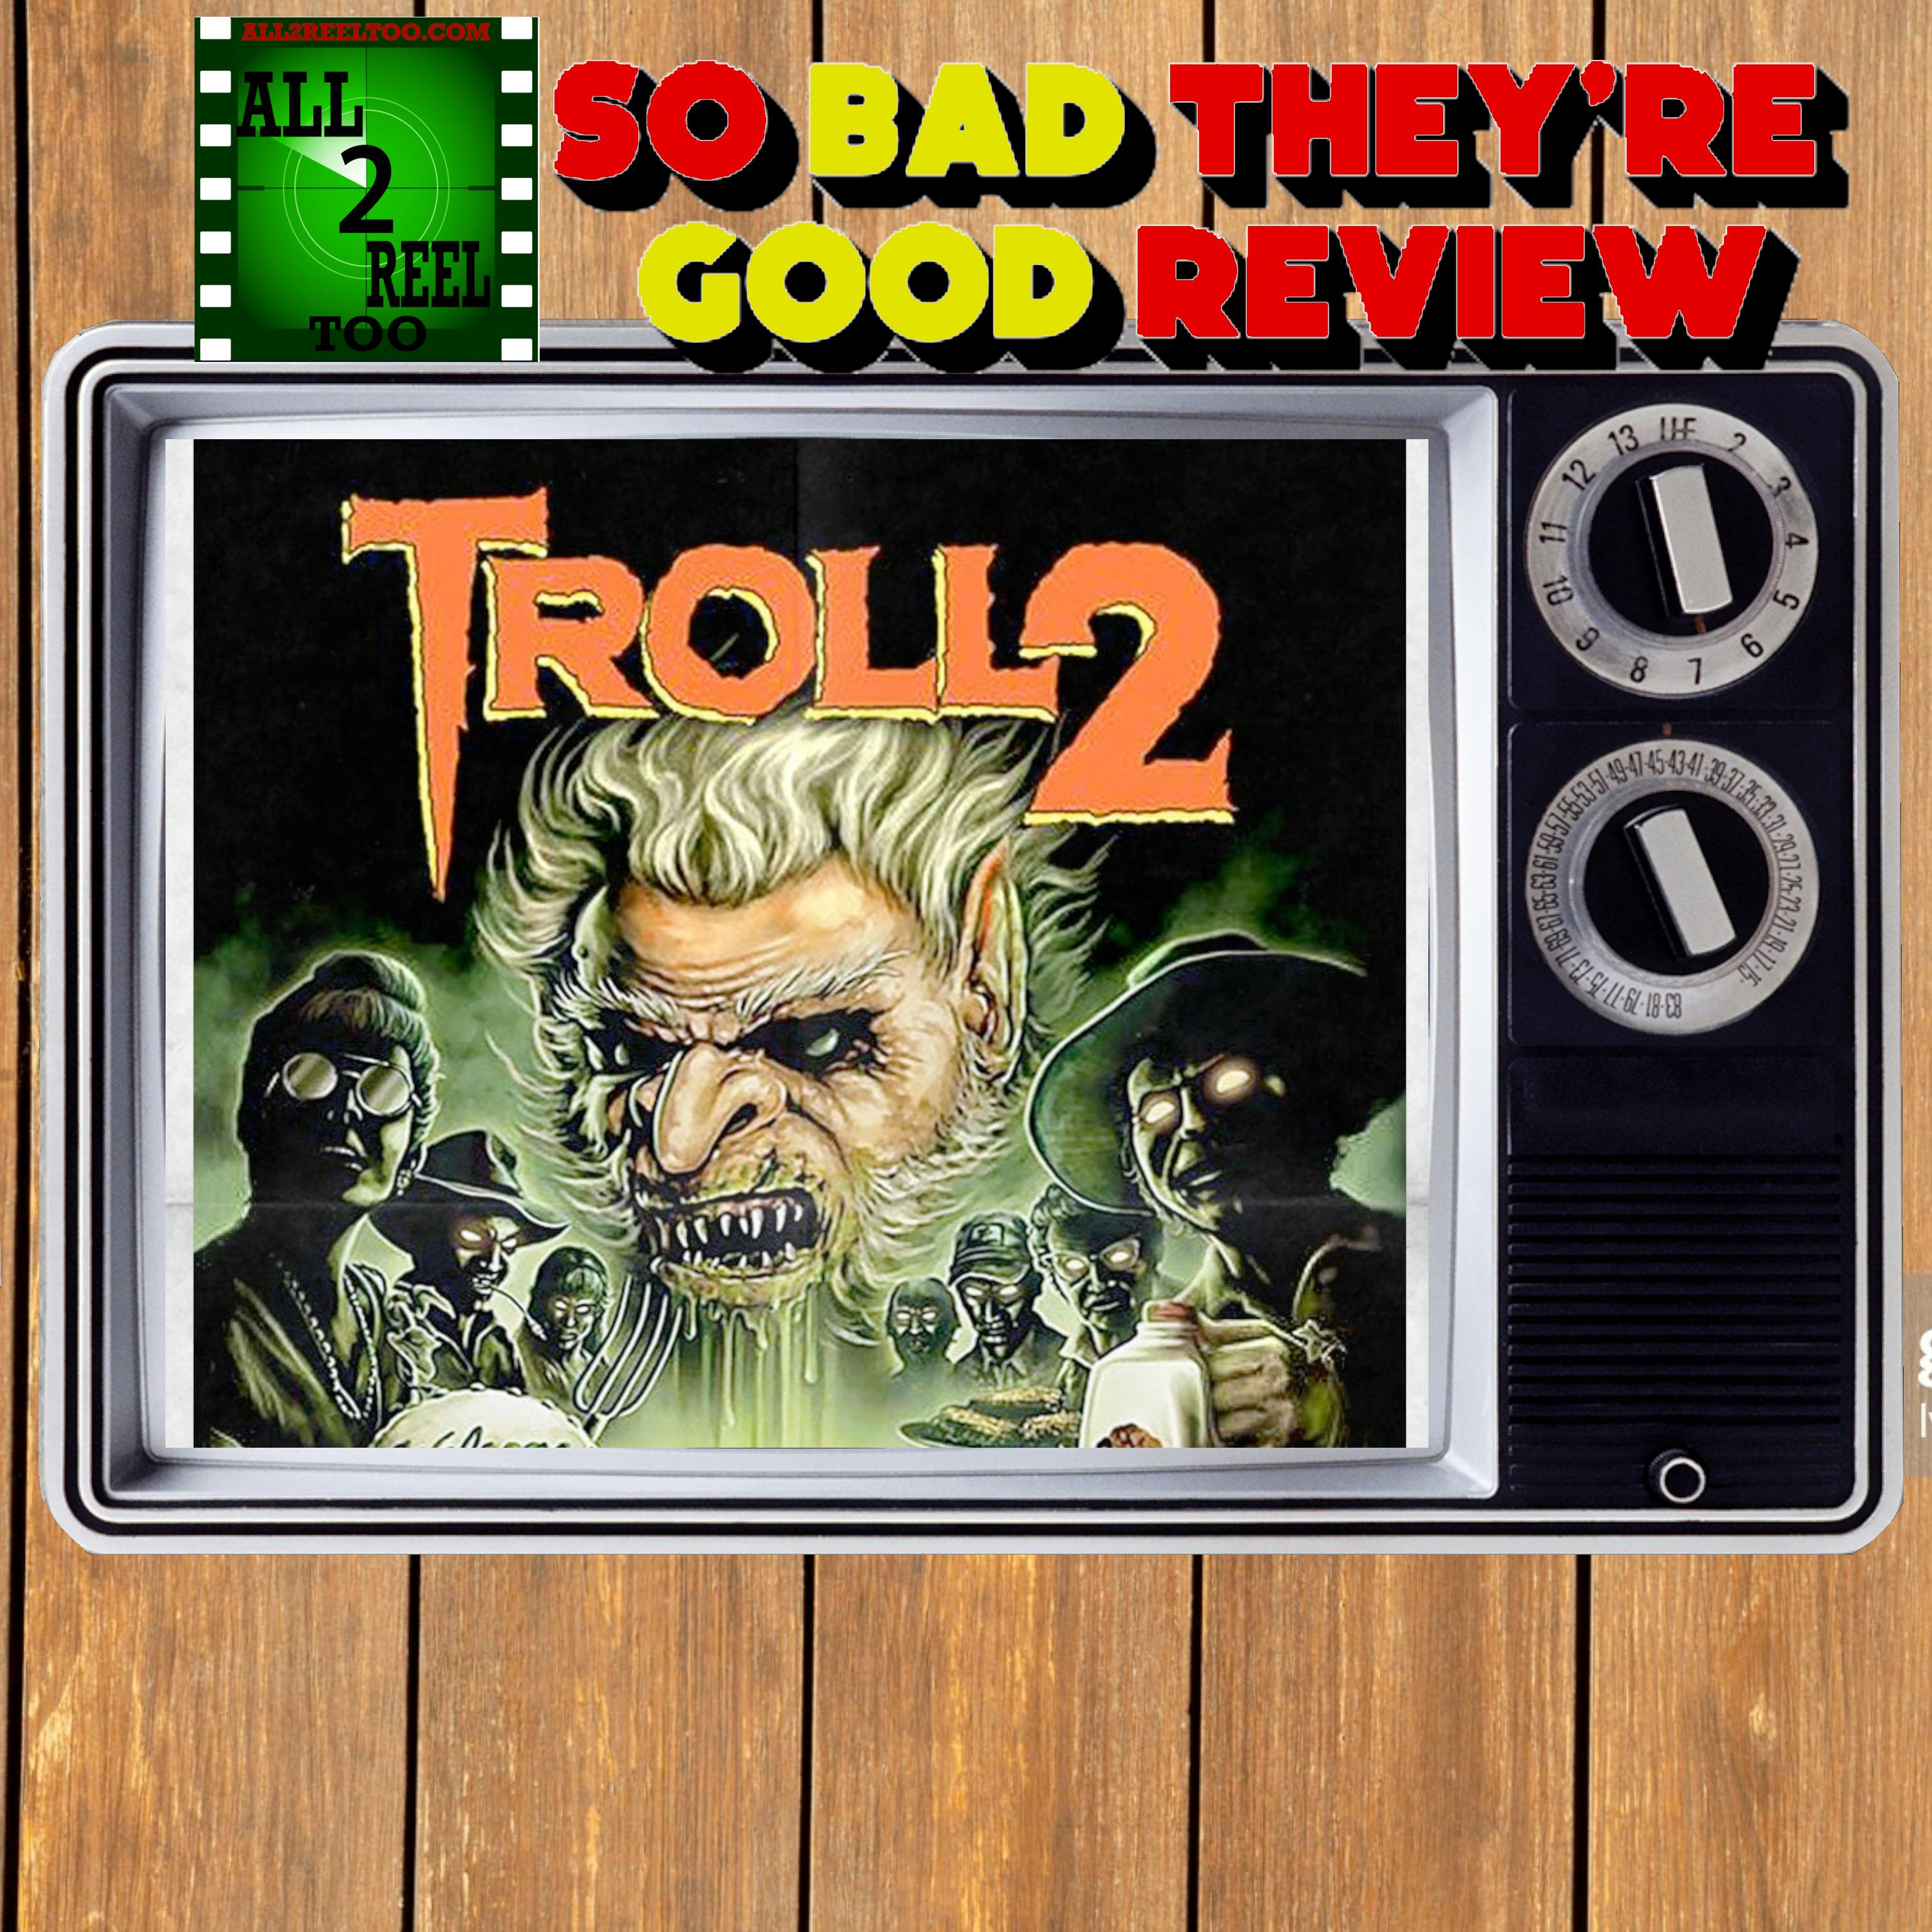 TROLL 2 (1990) - SO BAD THEY'RE GOOD REVIEW Image